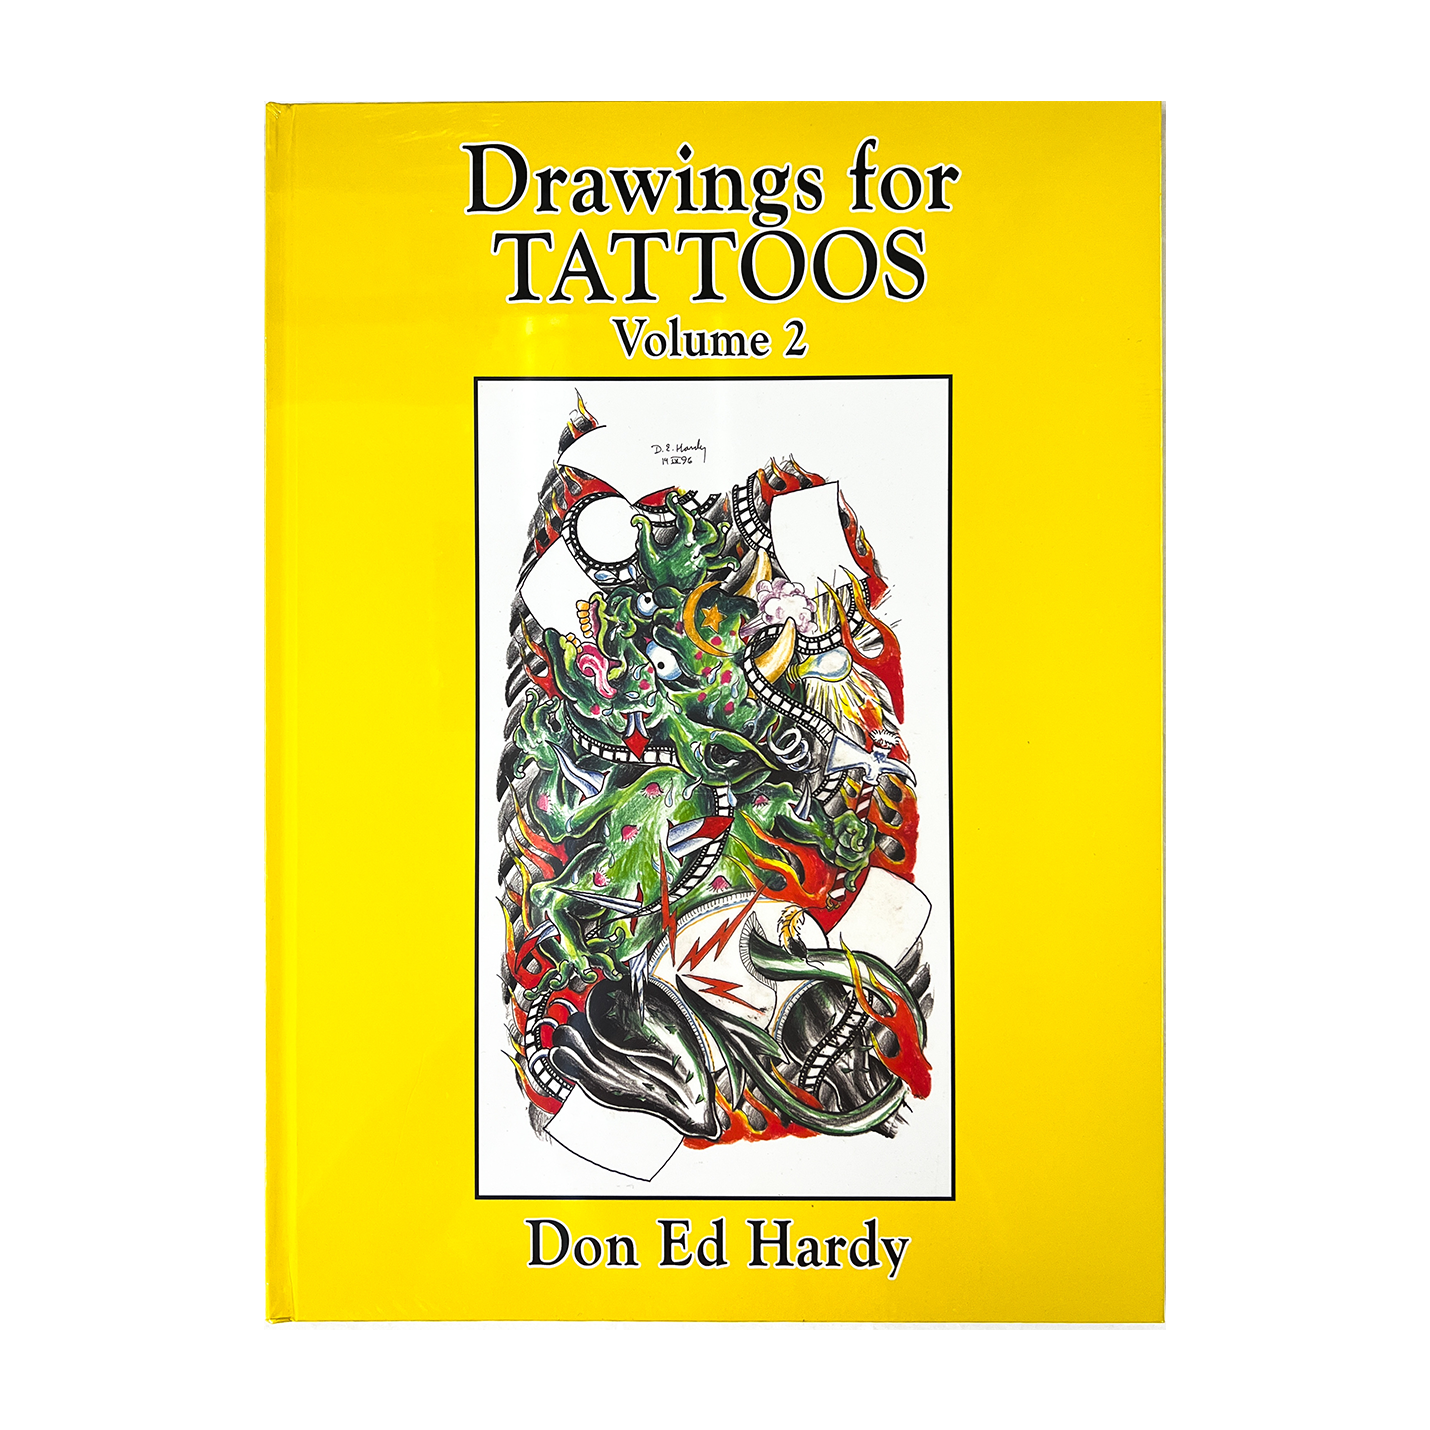 Drawings for Tattoos Vol 2